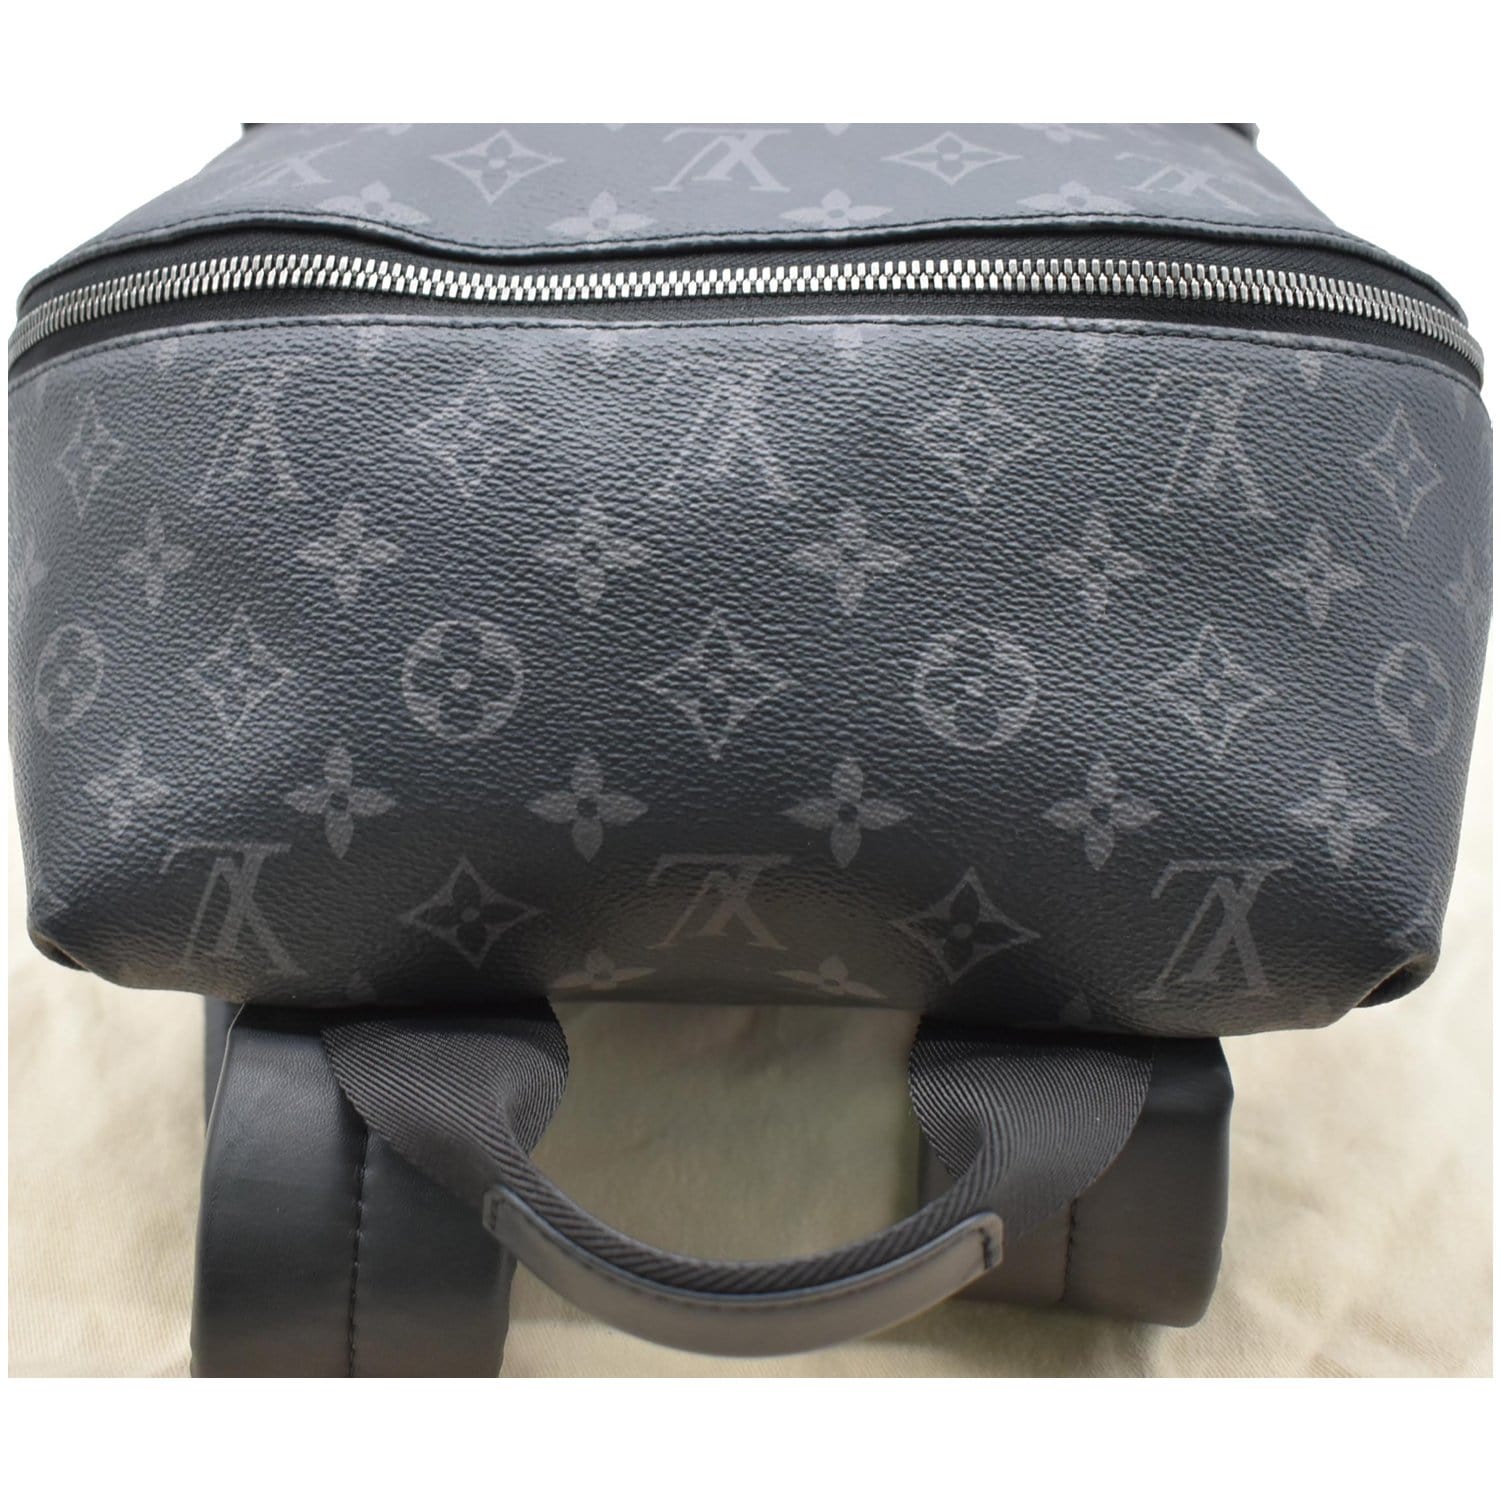 Shop Louis Vuitton MONOGRAM Discovery backpack pm (M43186) by